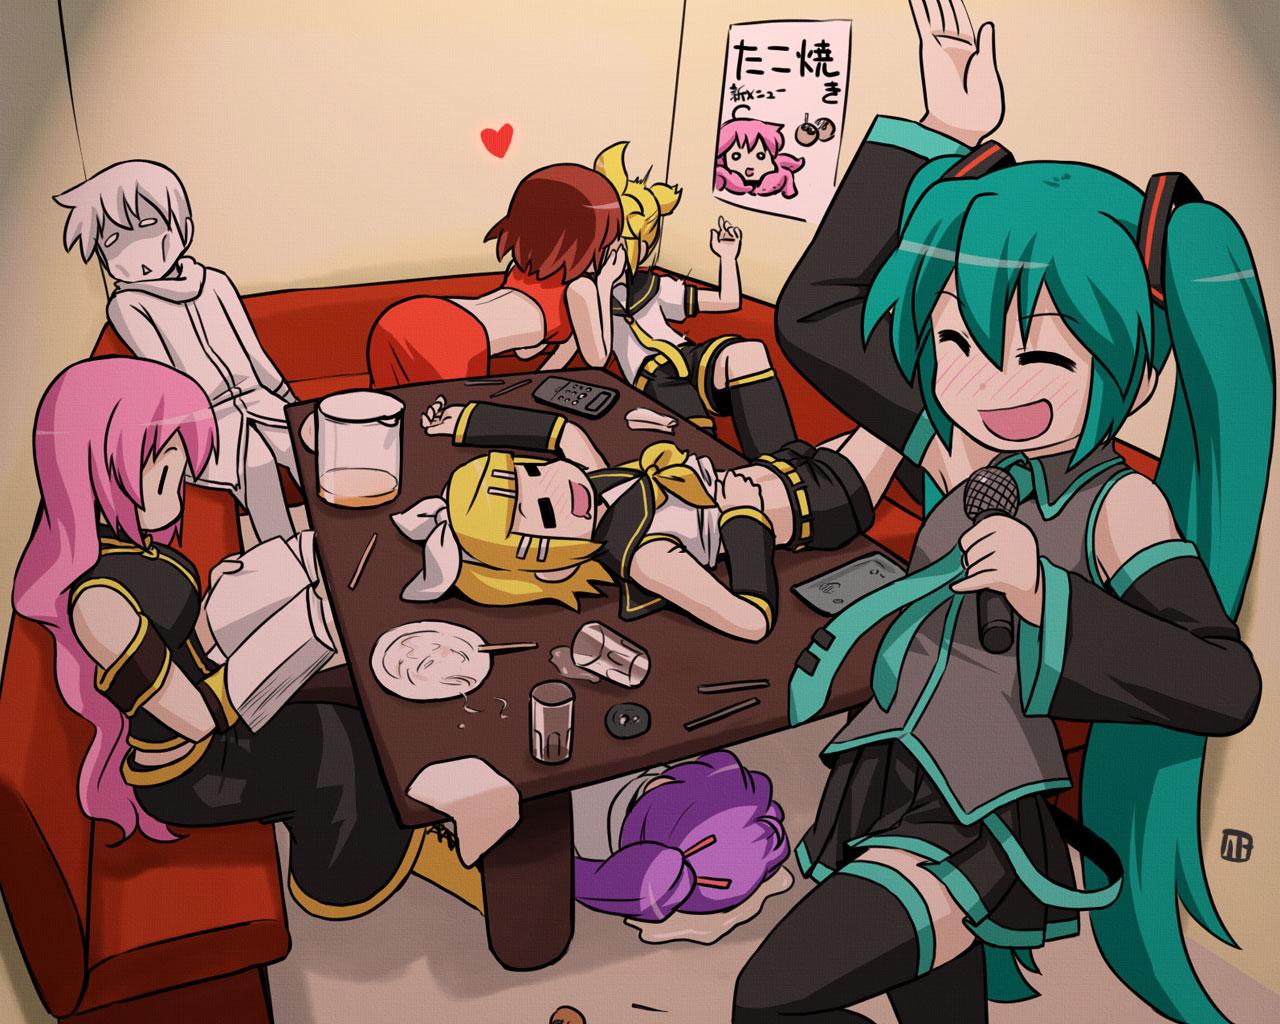 Anime Vocaloid Picture by nagian